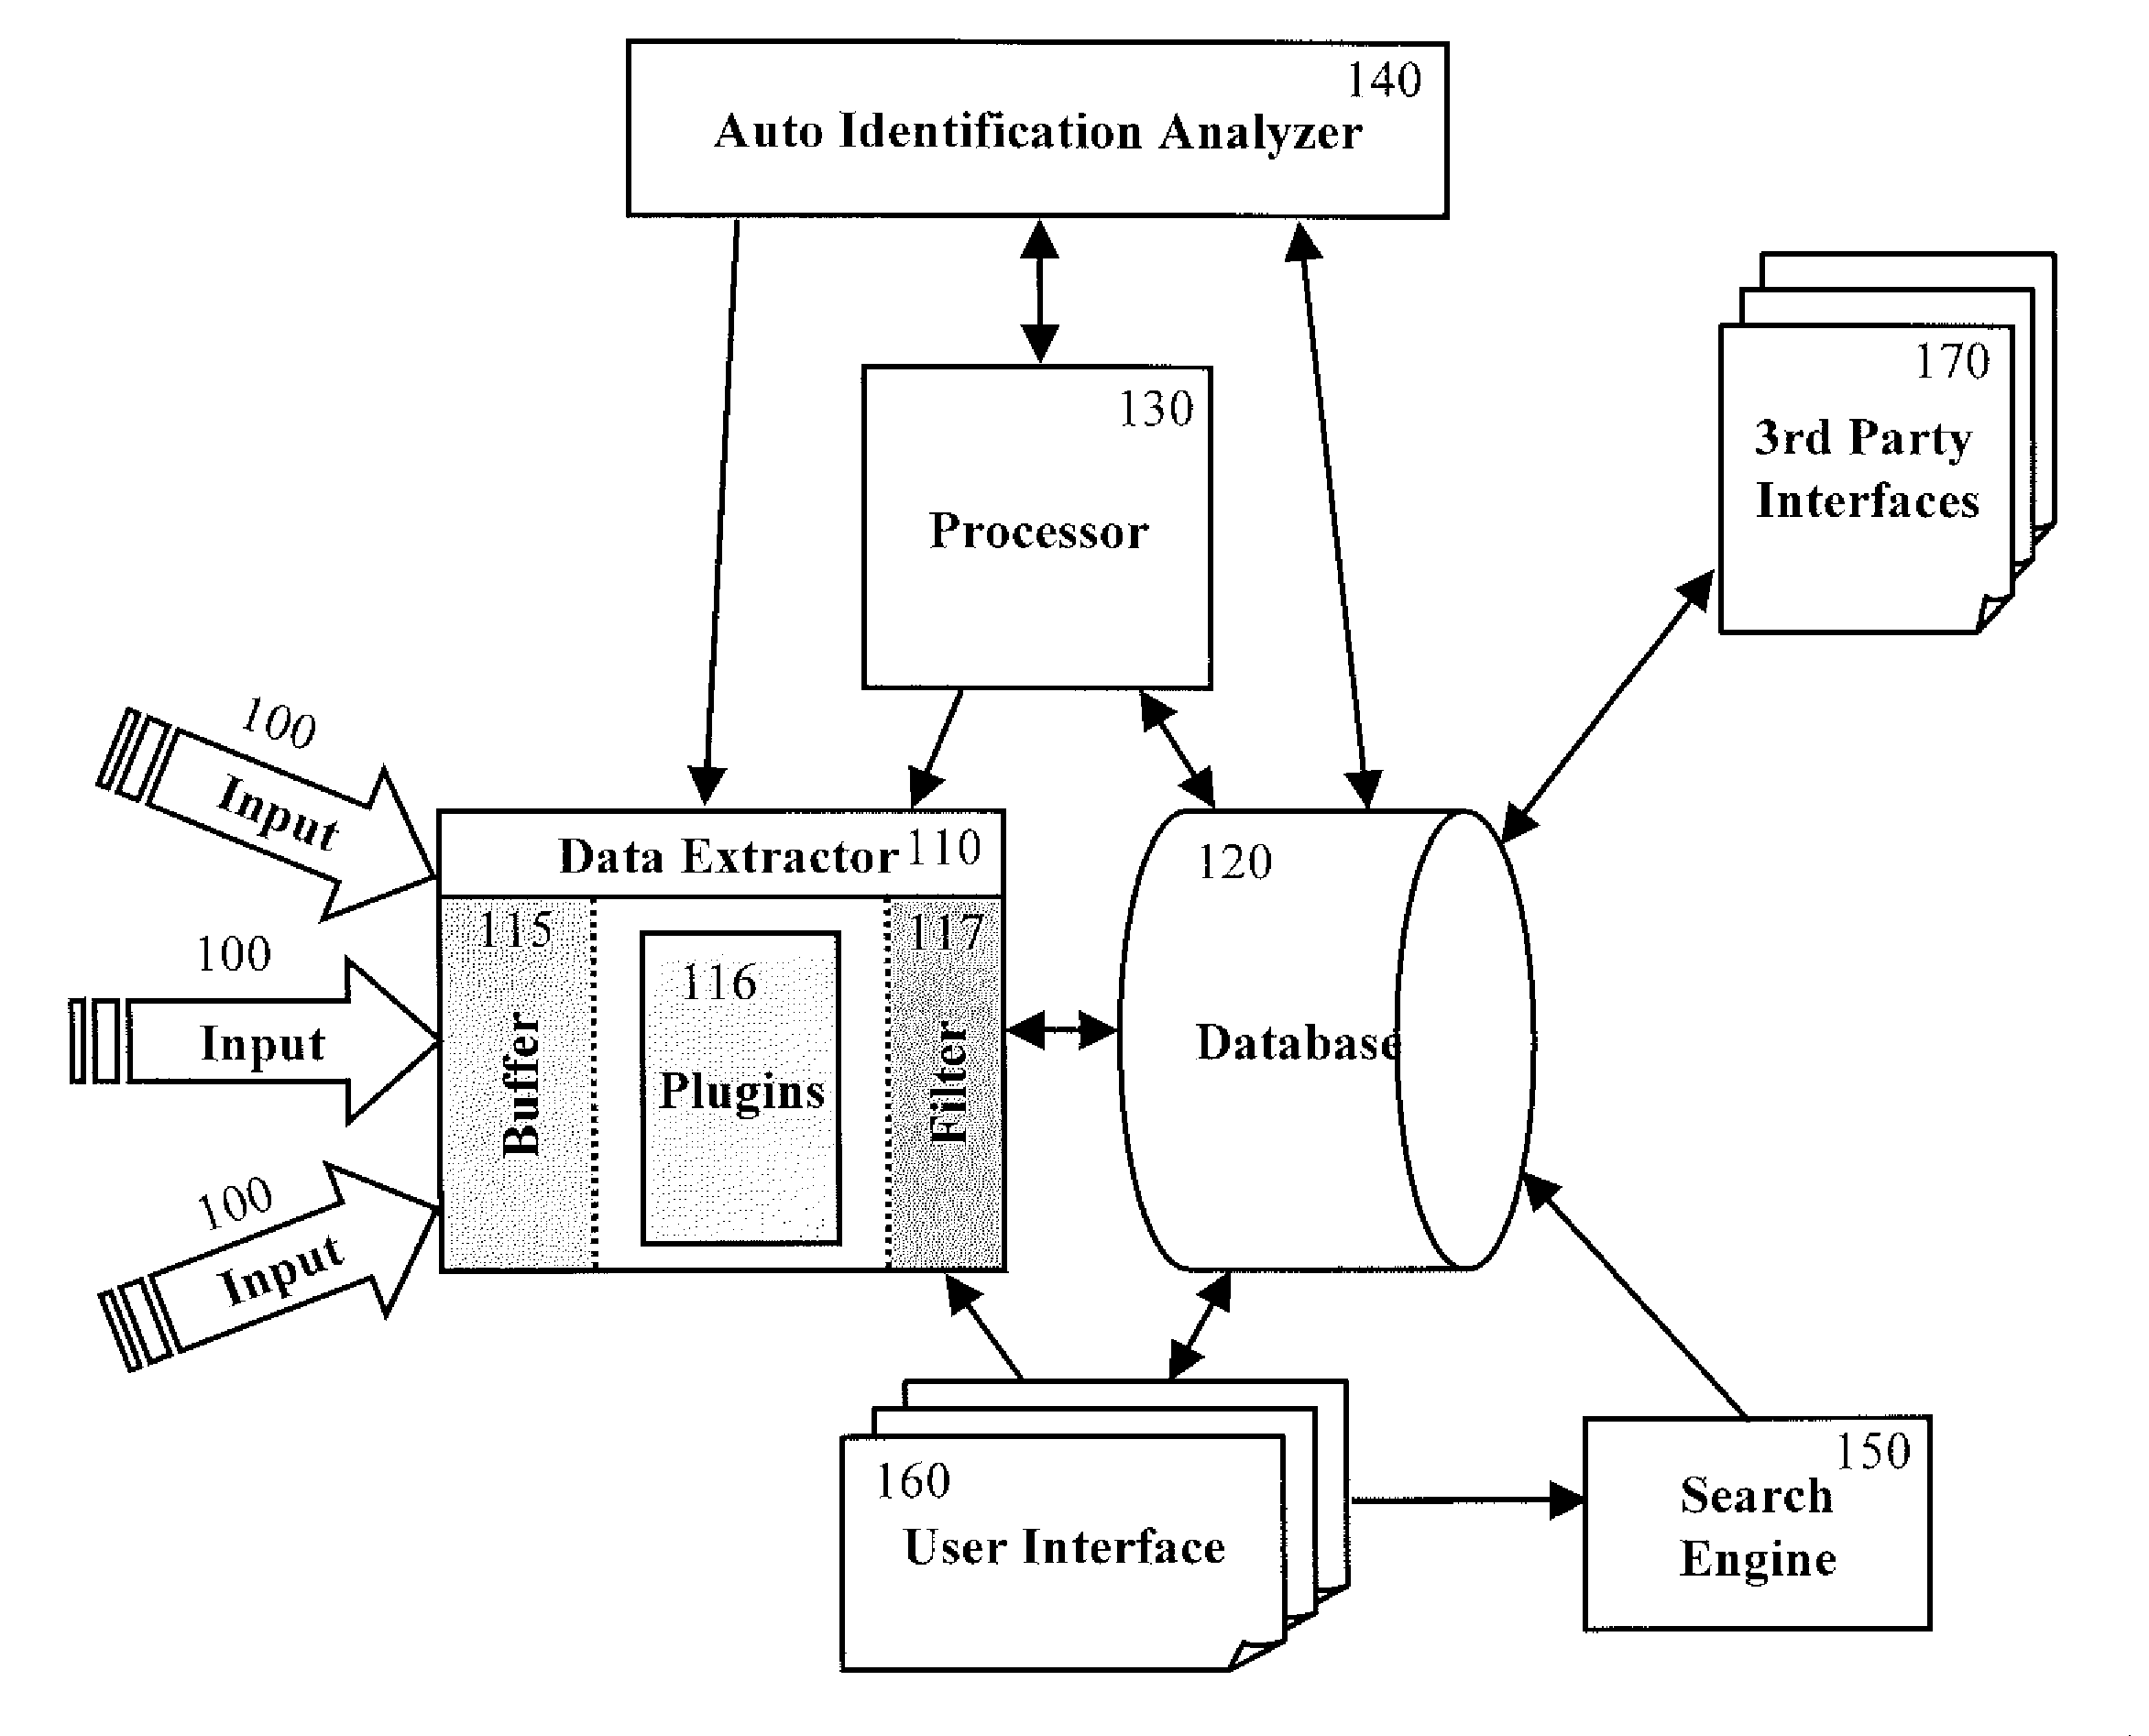 Method for Analyzing Activities Over Information Networks